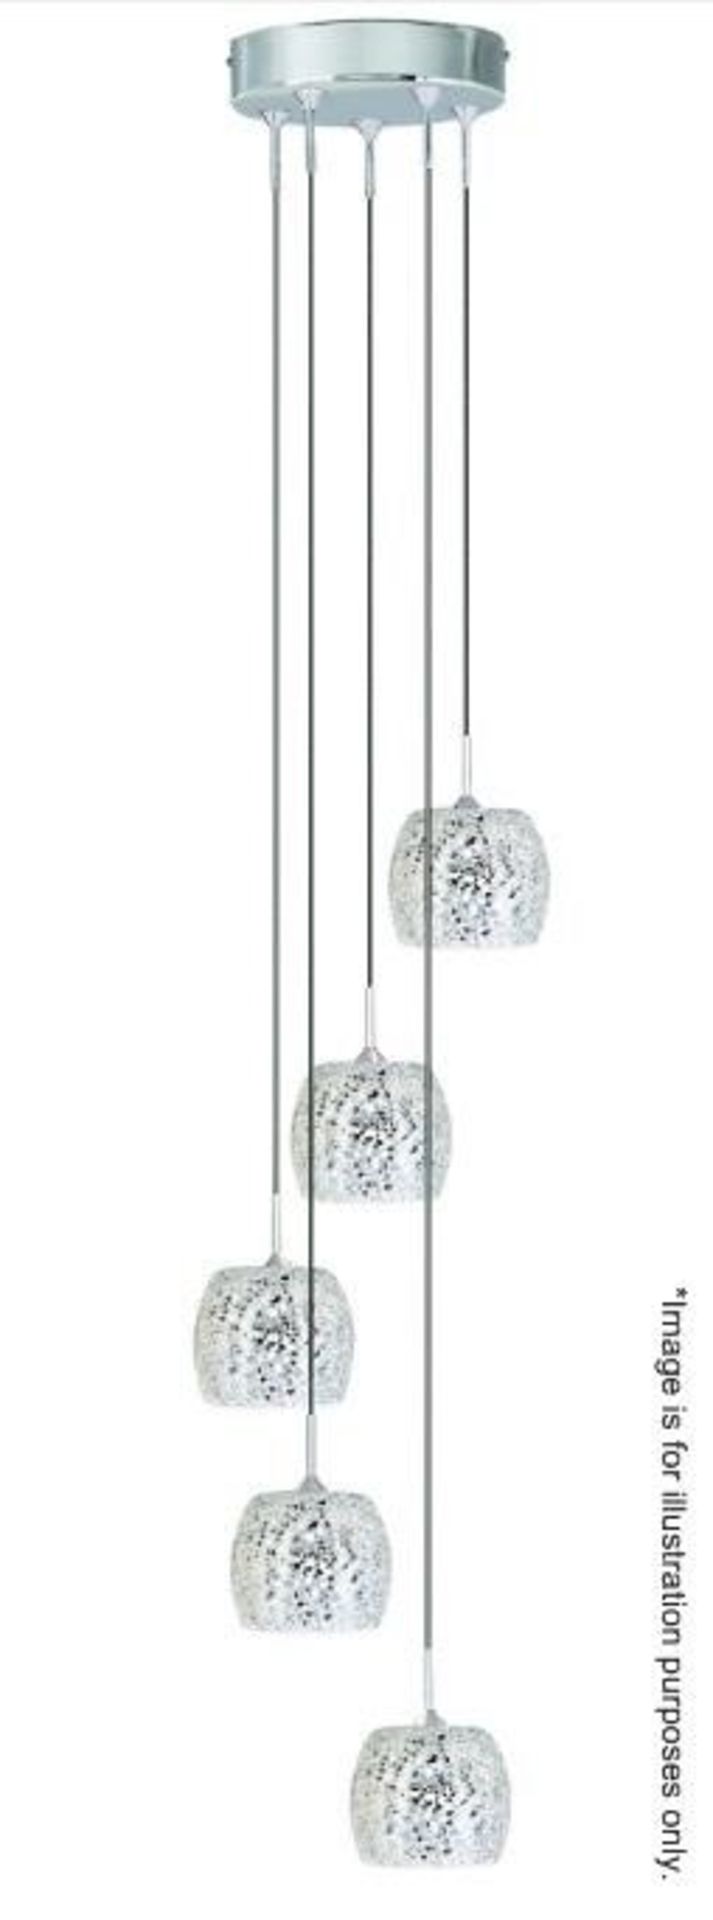 1 x Crackle White Mosaic Glass Shade 5-Light Fitting With Adjustable Height - Ex Display Stock - CL2 - Image 3 of 6